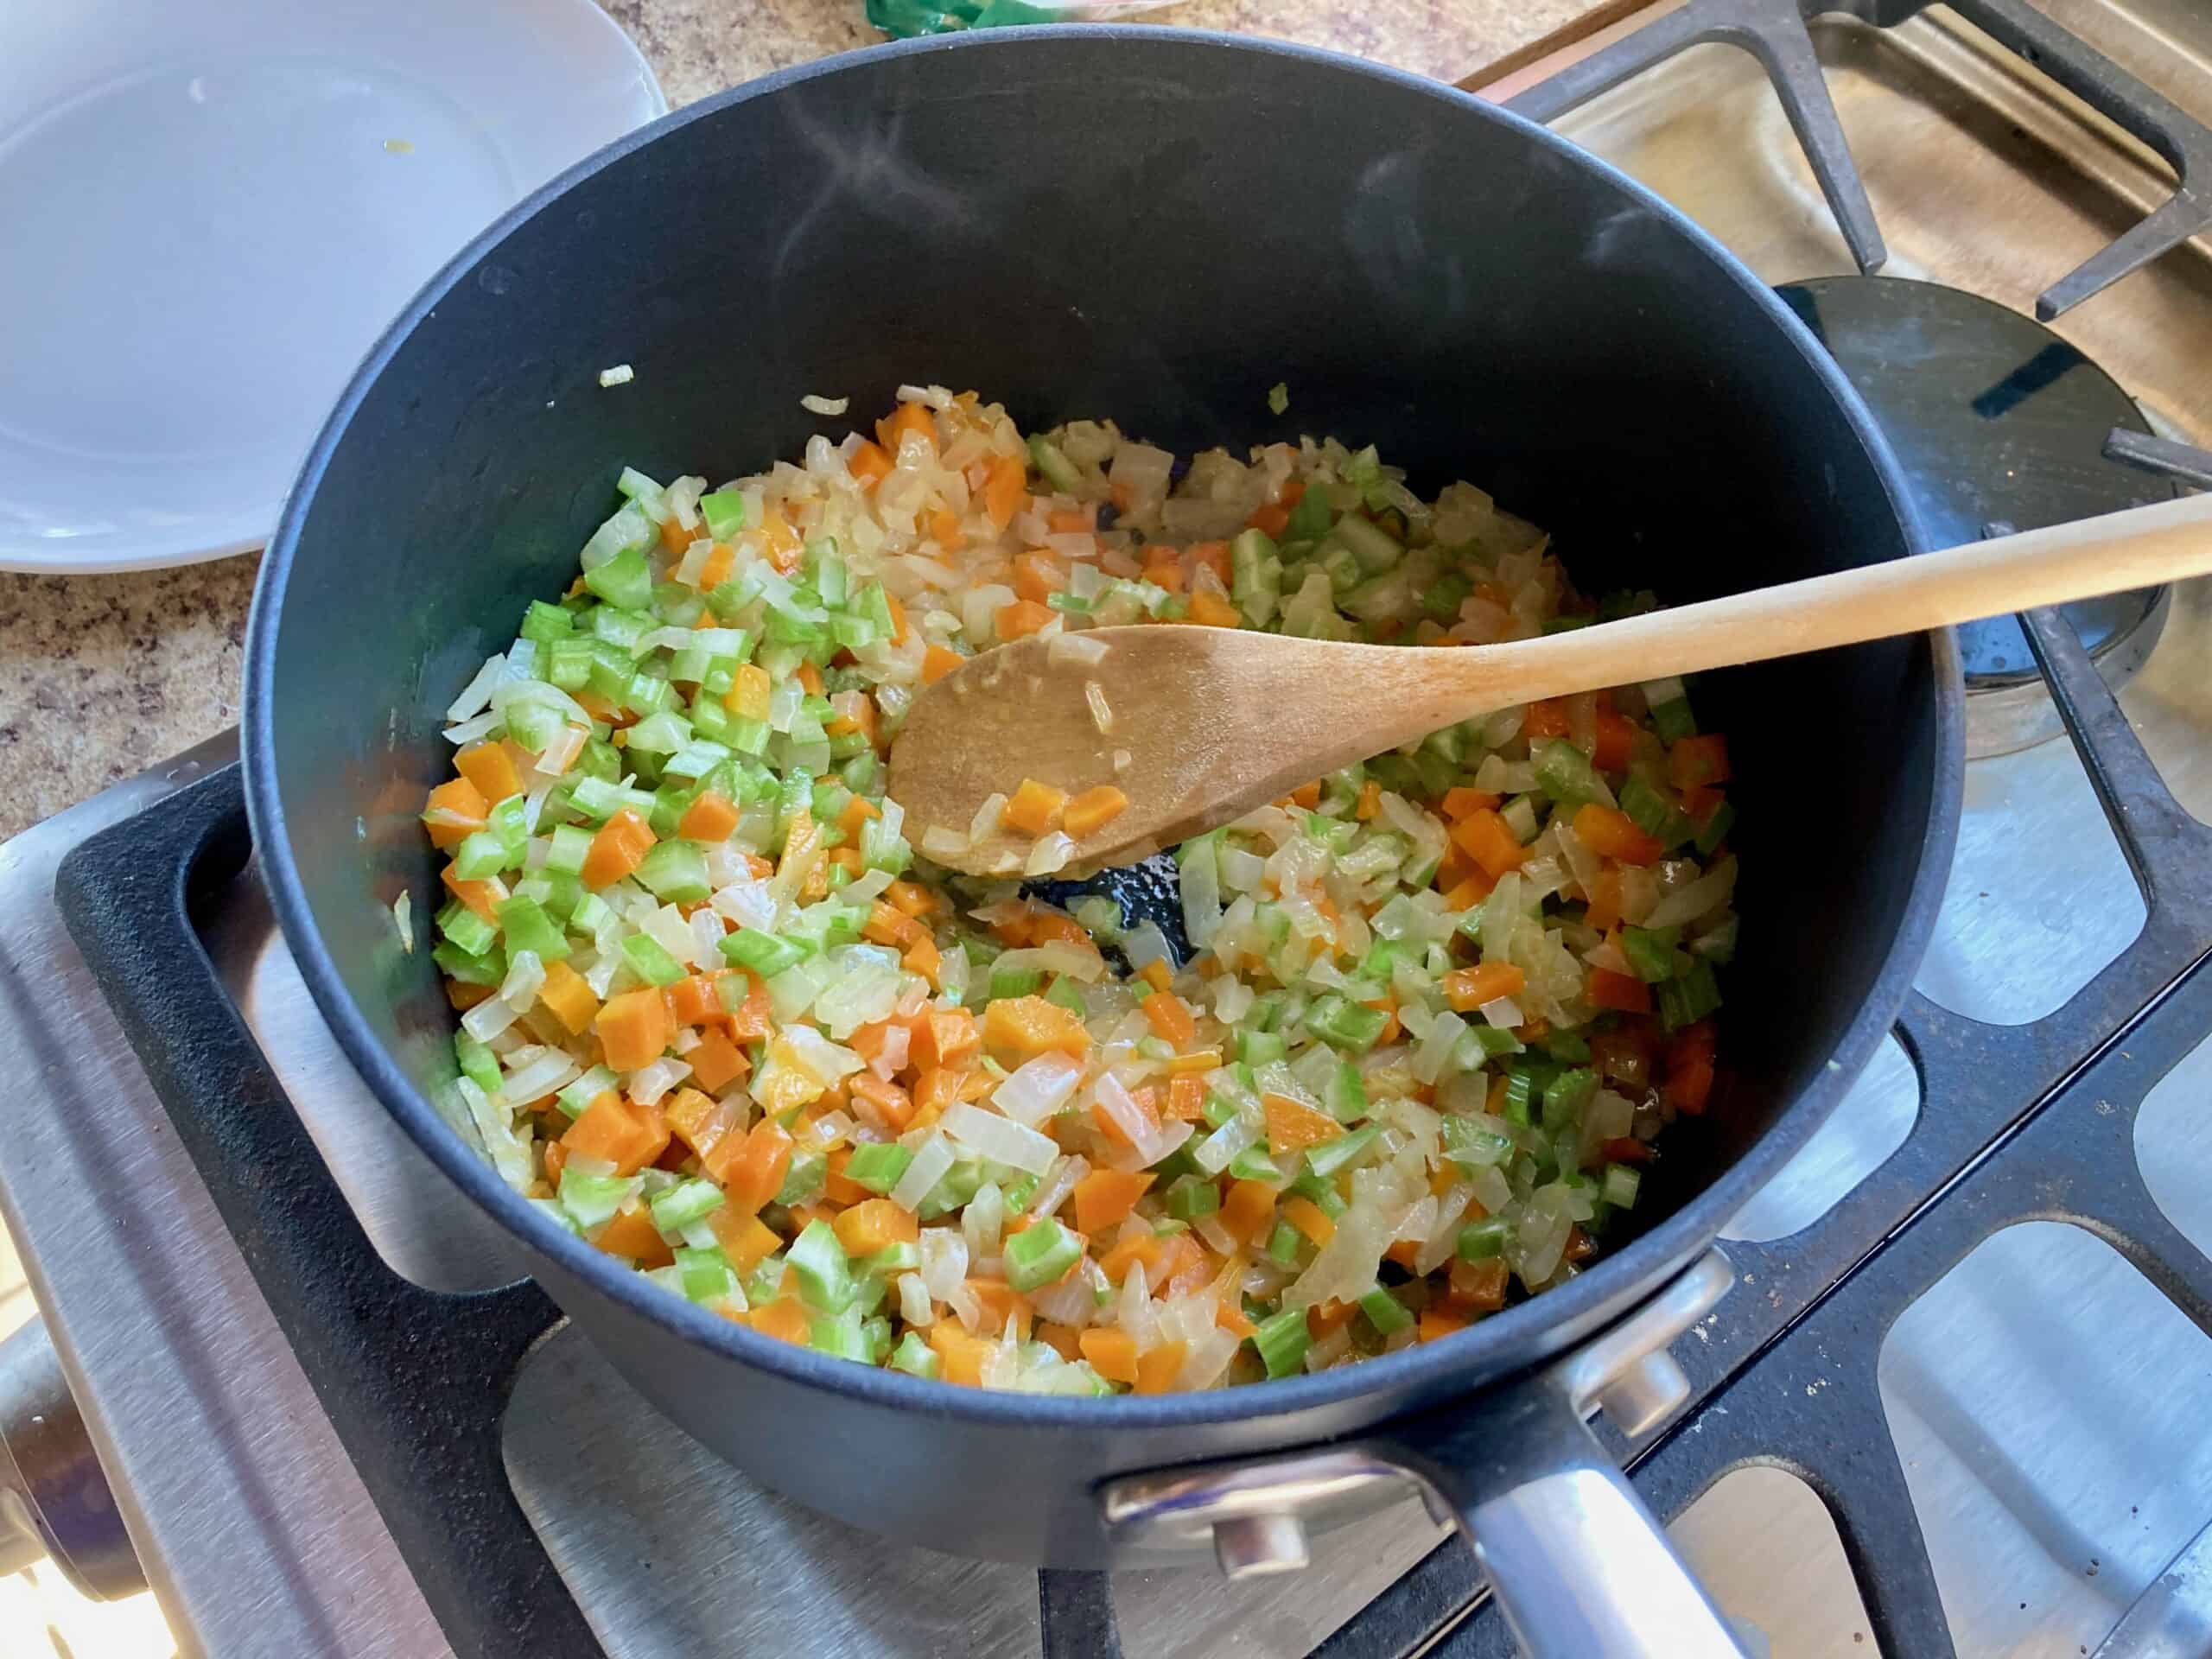 Chopped carrots, celery, onion and garlic in a black pot on the stove with a wooden spoon